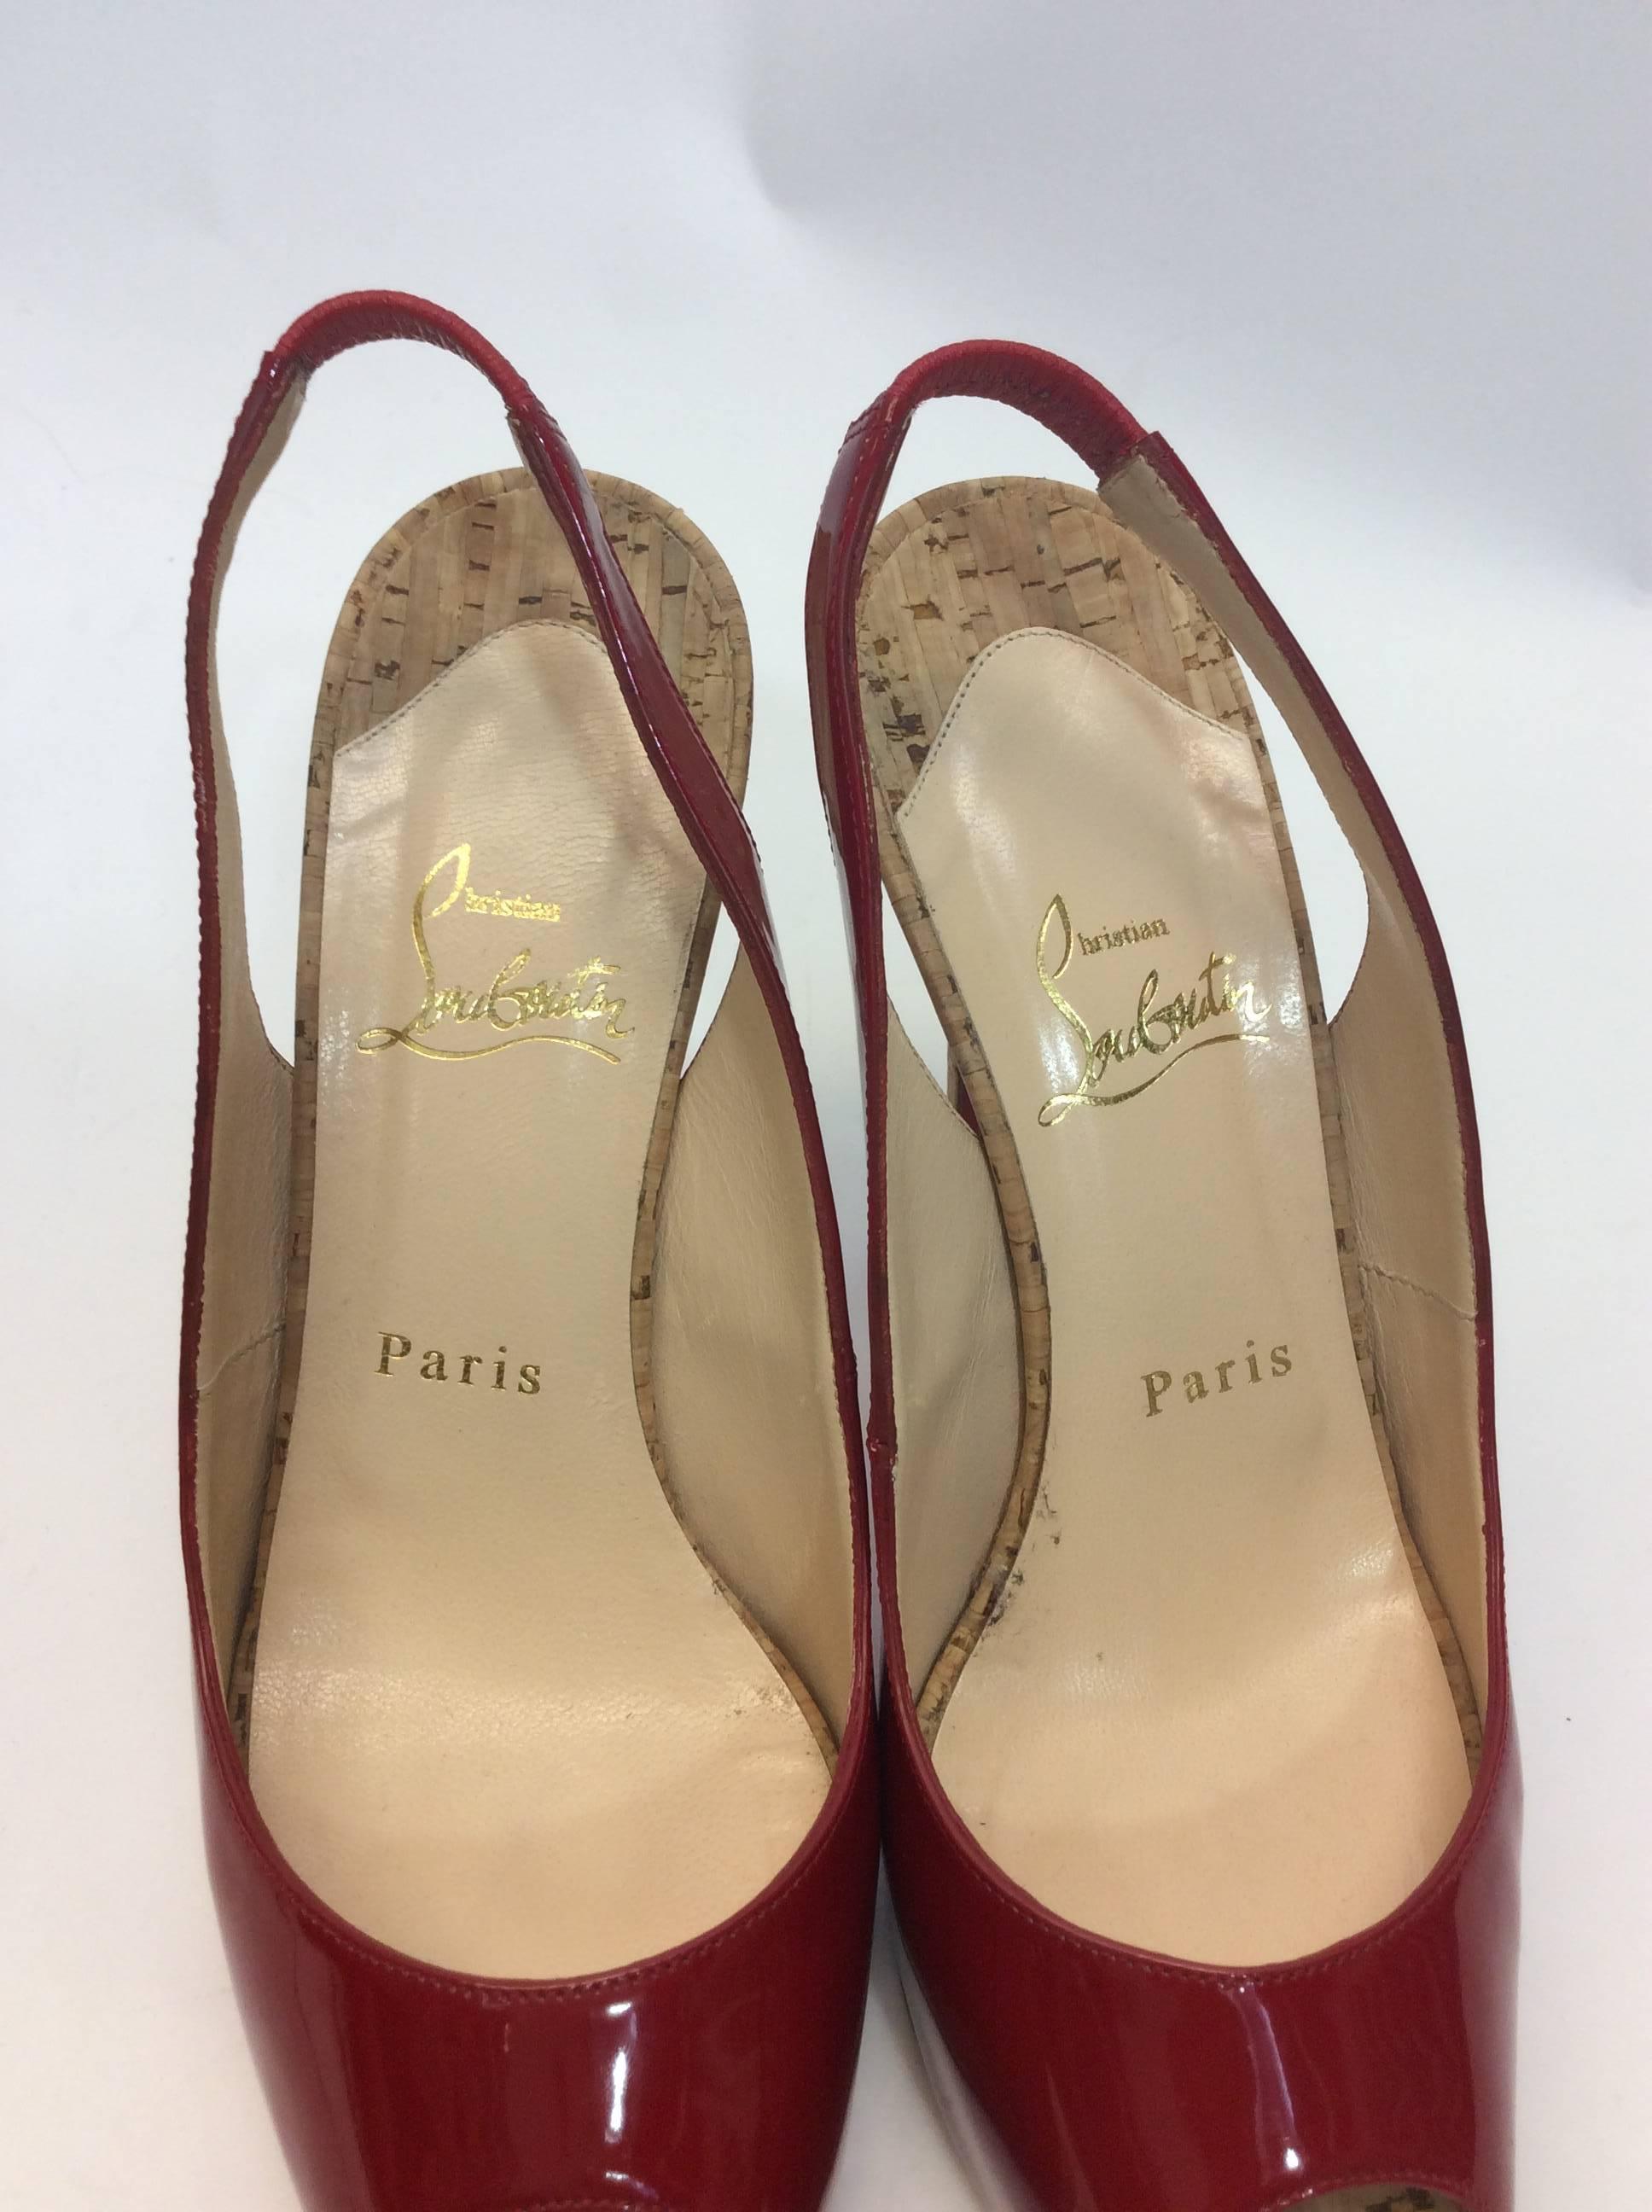 Christian Louboutin Patent Leather Peep Toe Pumps In Excellent Condition For Sale In Narberth, PA